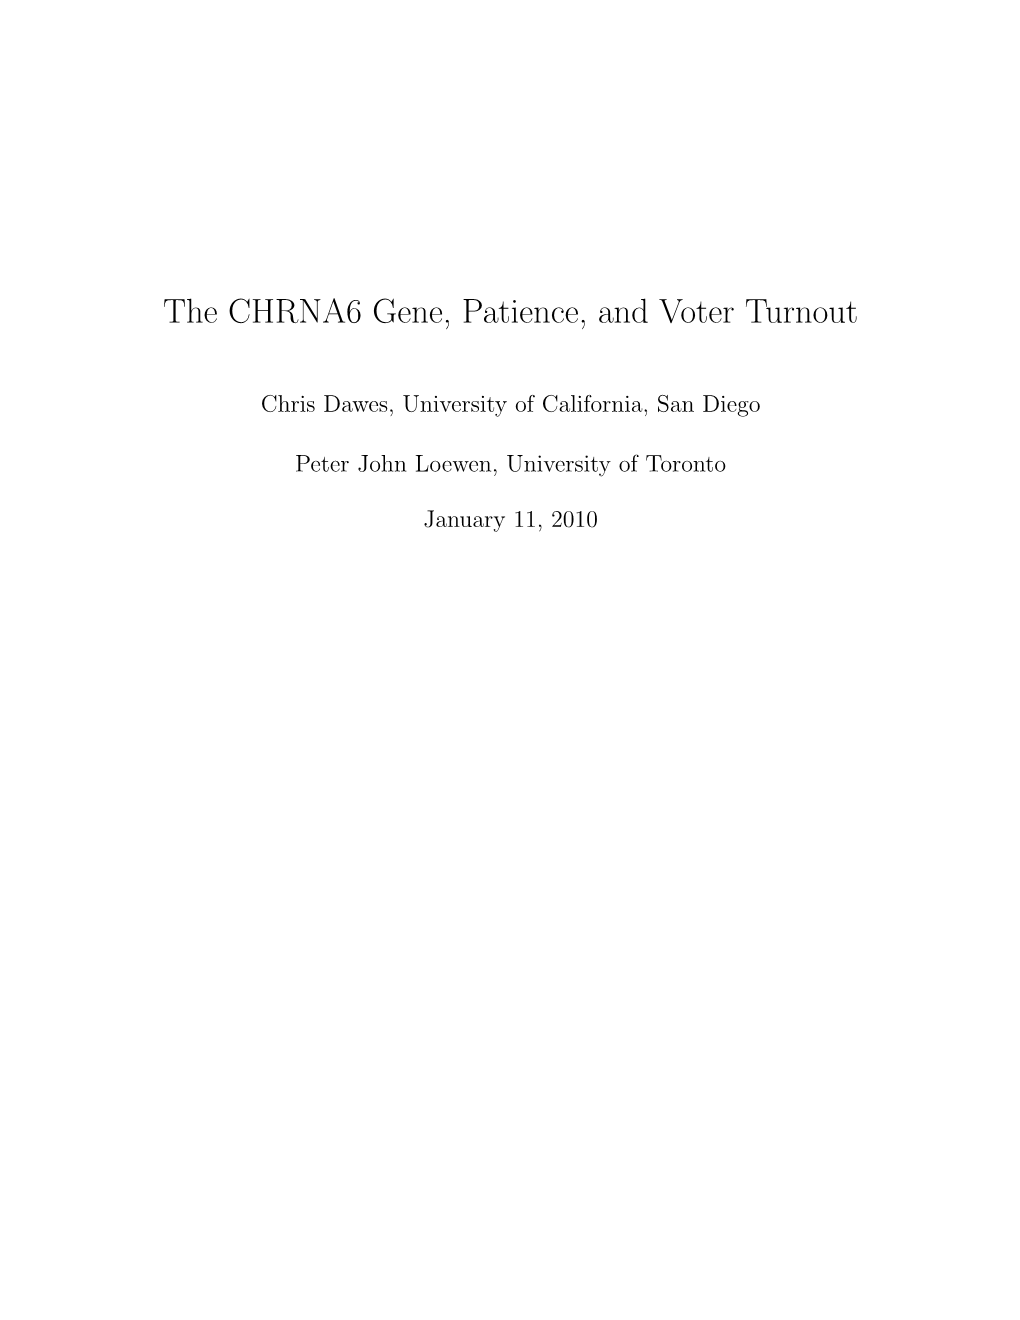 The CHRNA6 Gene, Patience, and Voter Turnout